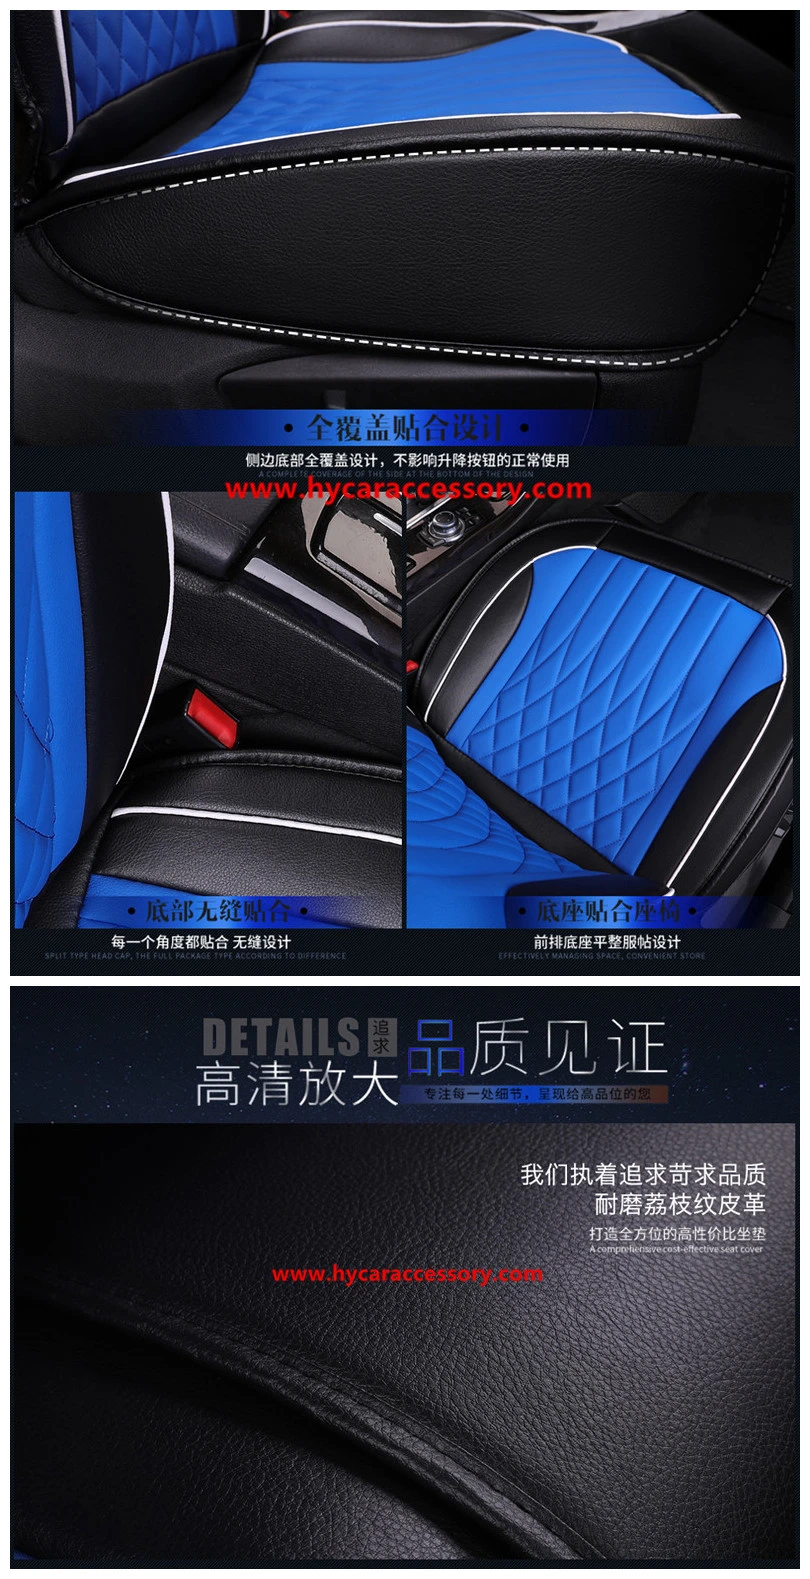 Car Accessories Car Decoration Luxury Seat Cushion Universal Pure Leather Auto Car Seat Cover